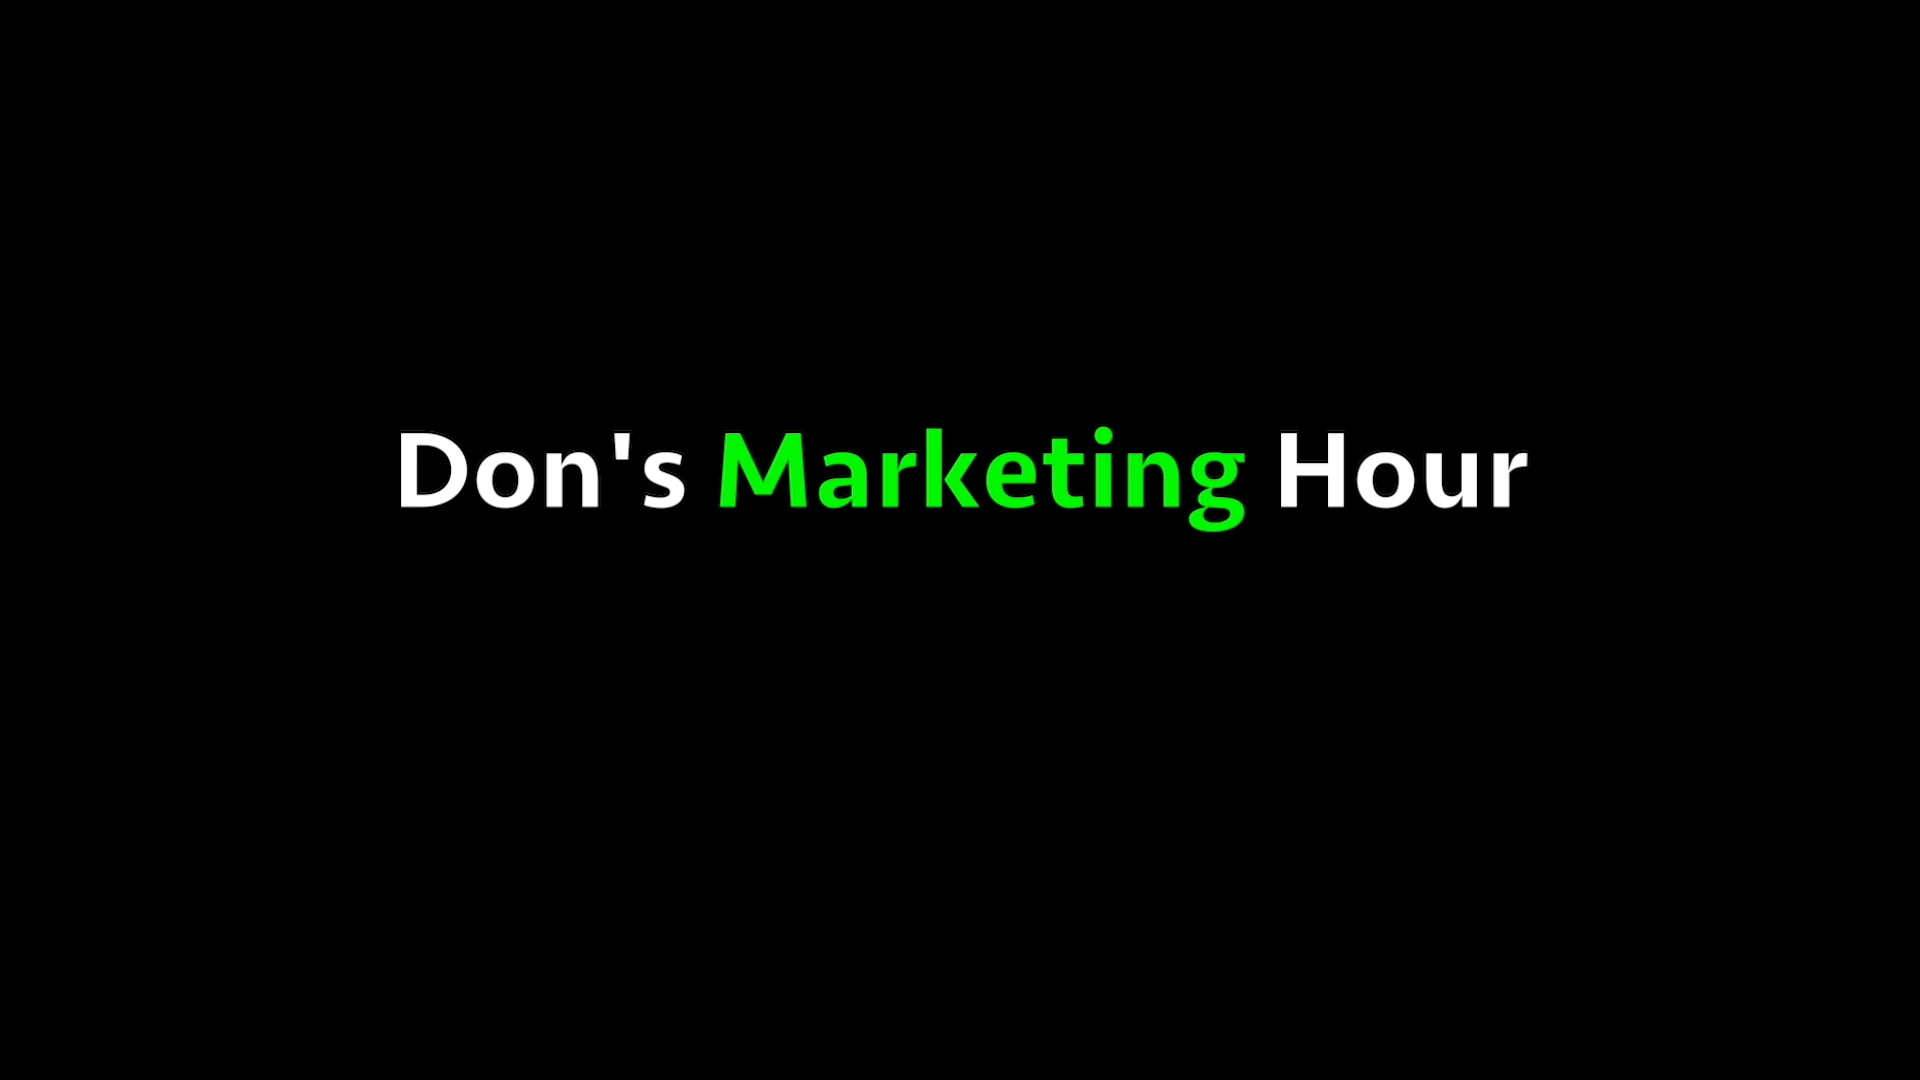 Don's Marketing Hour (2020)